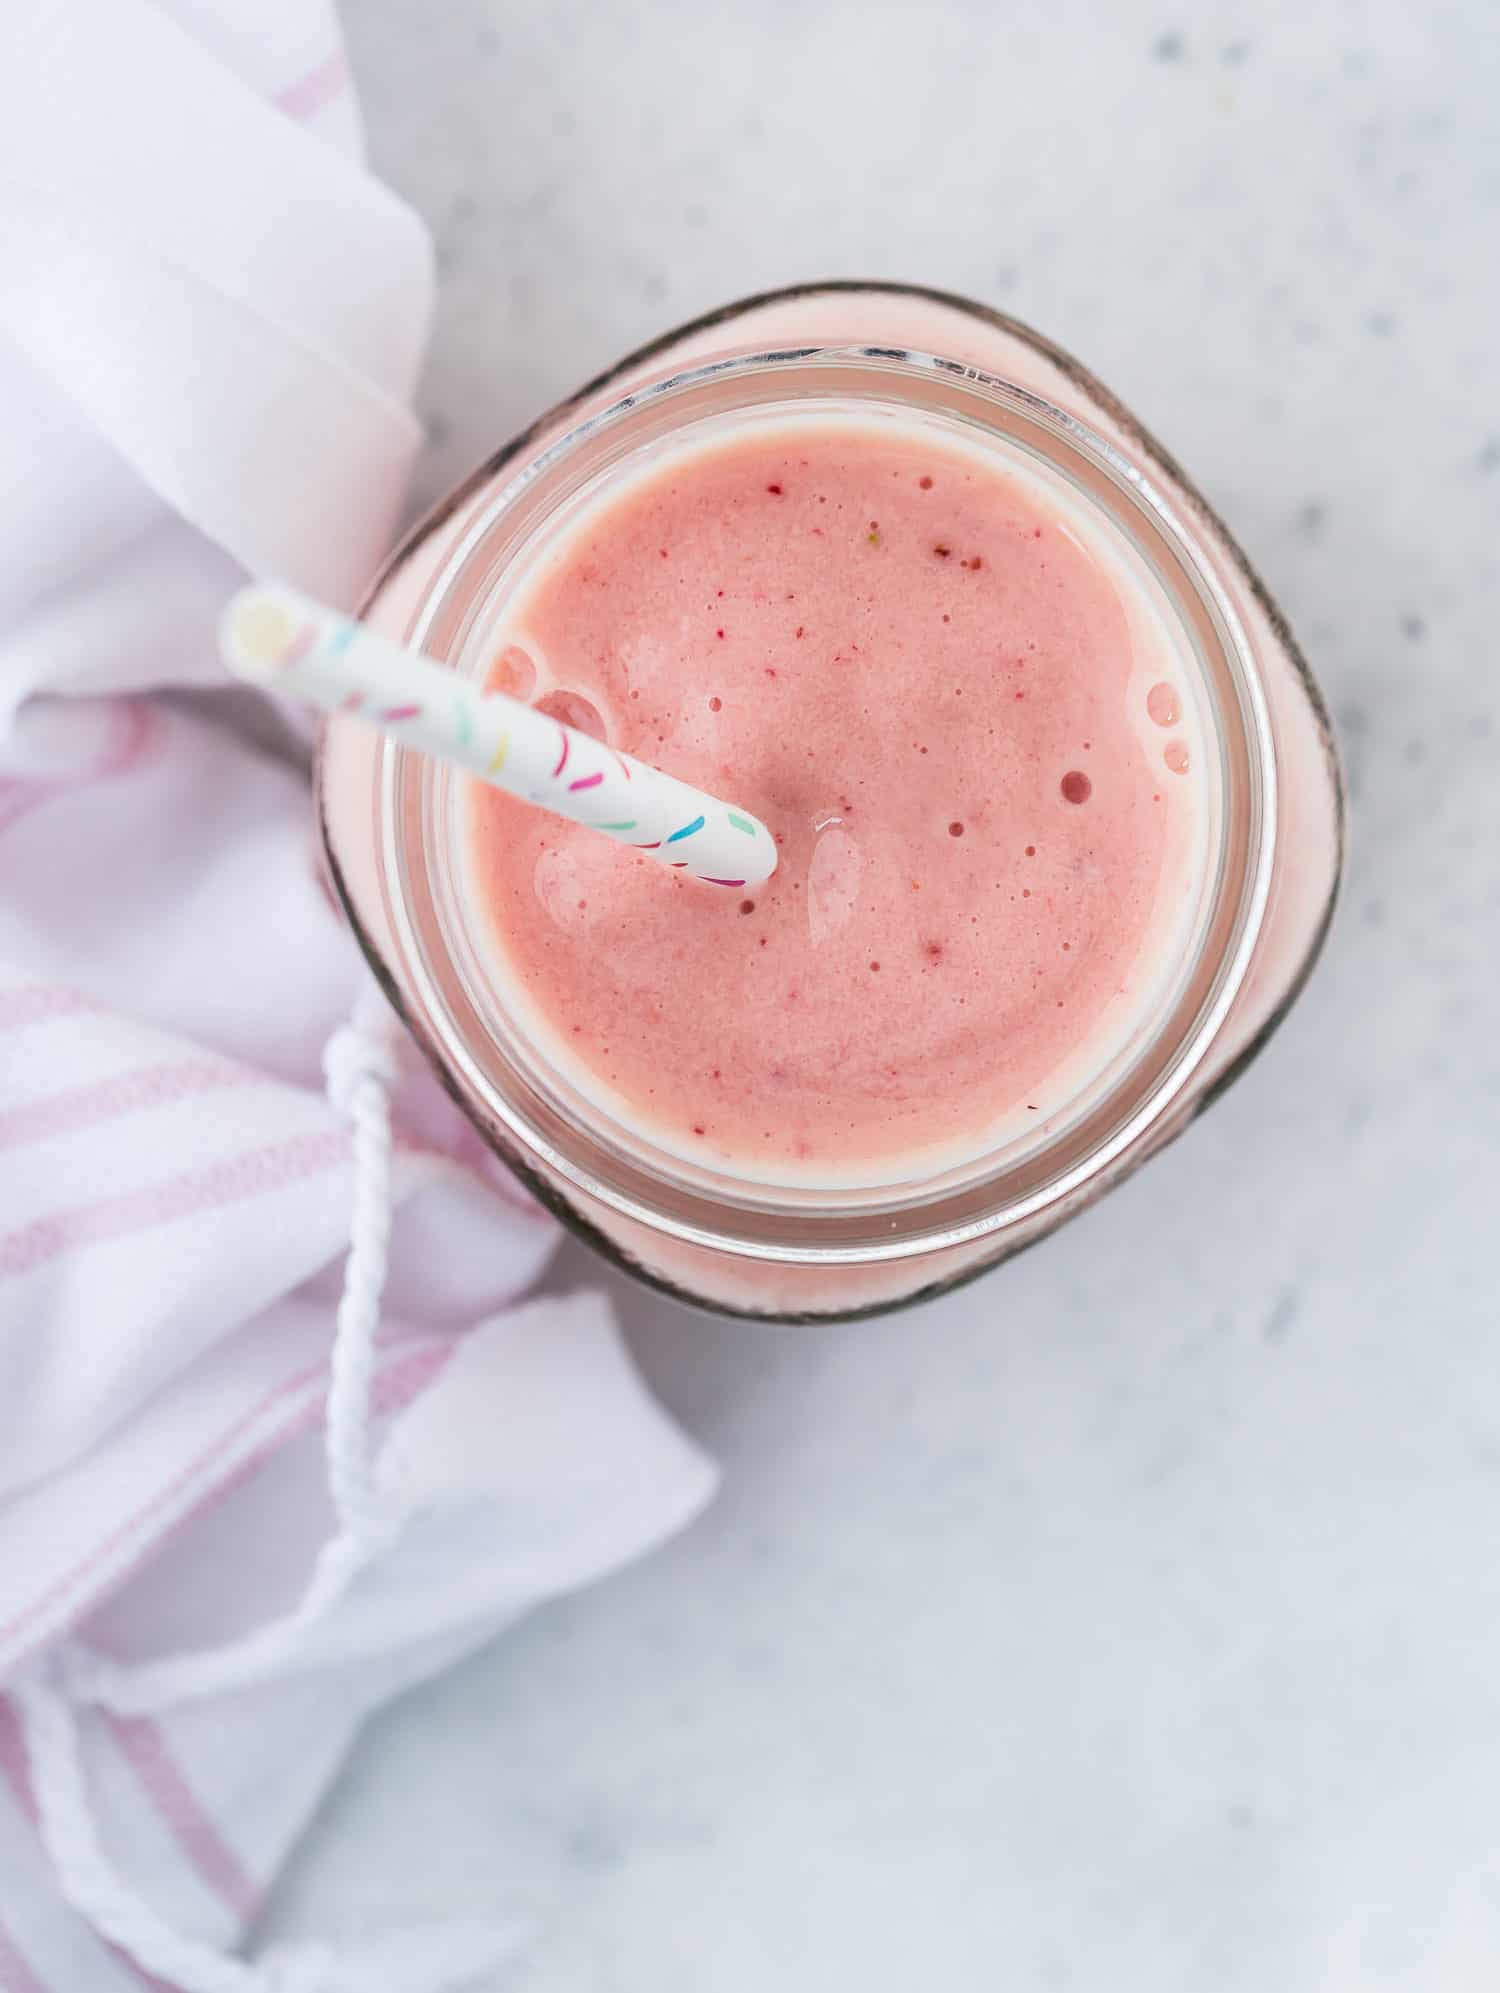 Overhead view of light pink smoothie.